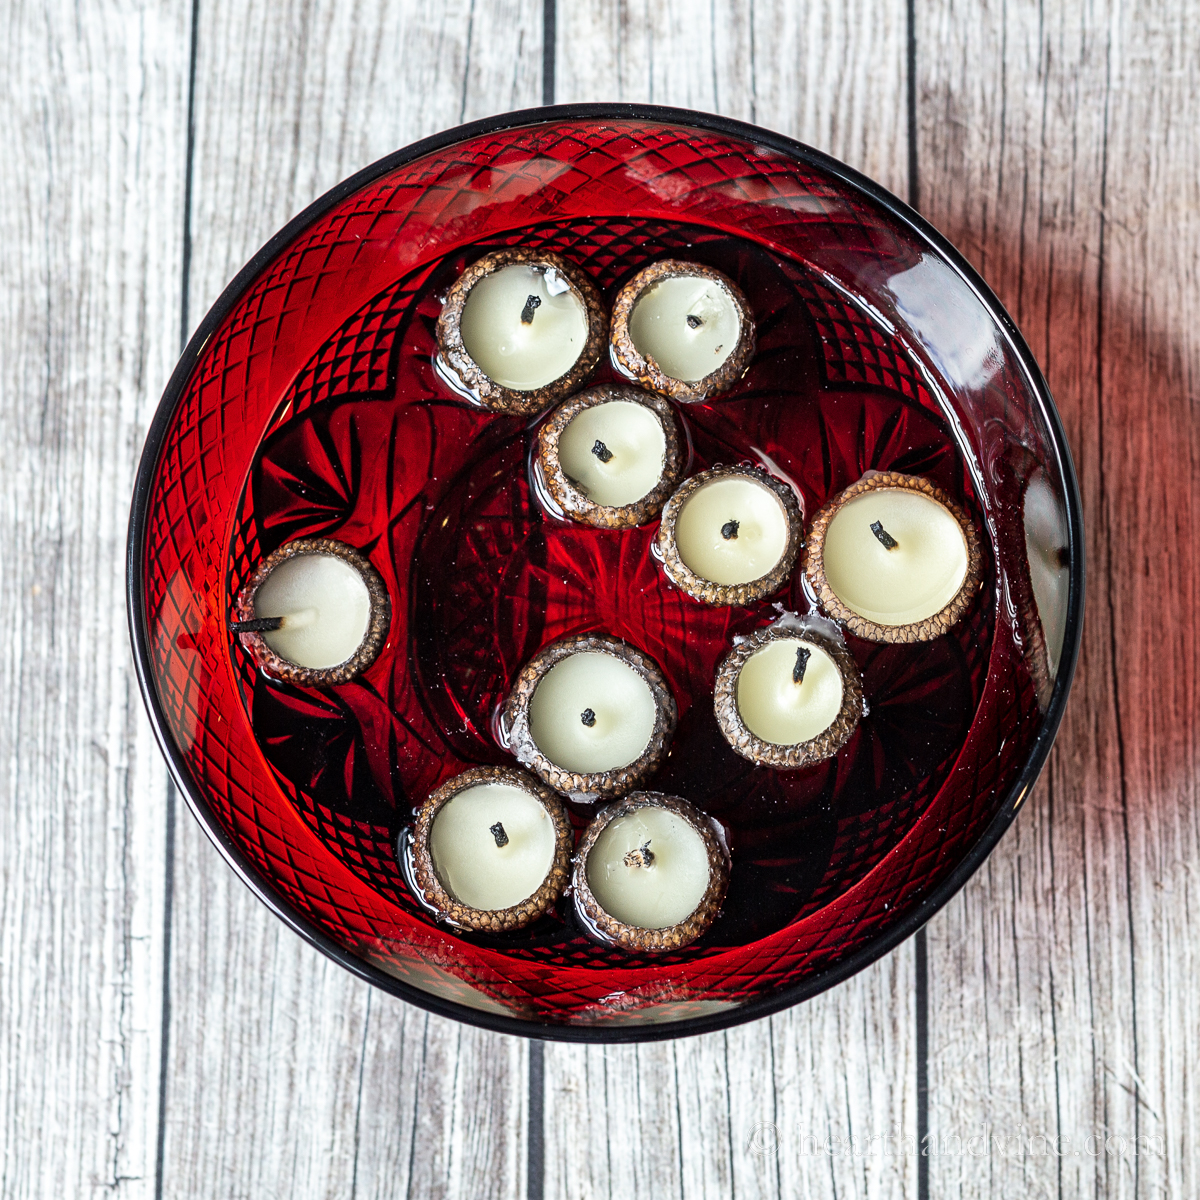 An ornate red bowl filled with water and several beeswax acorn cap candles floating on top.